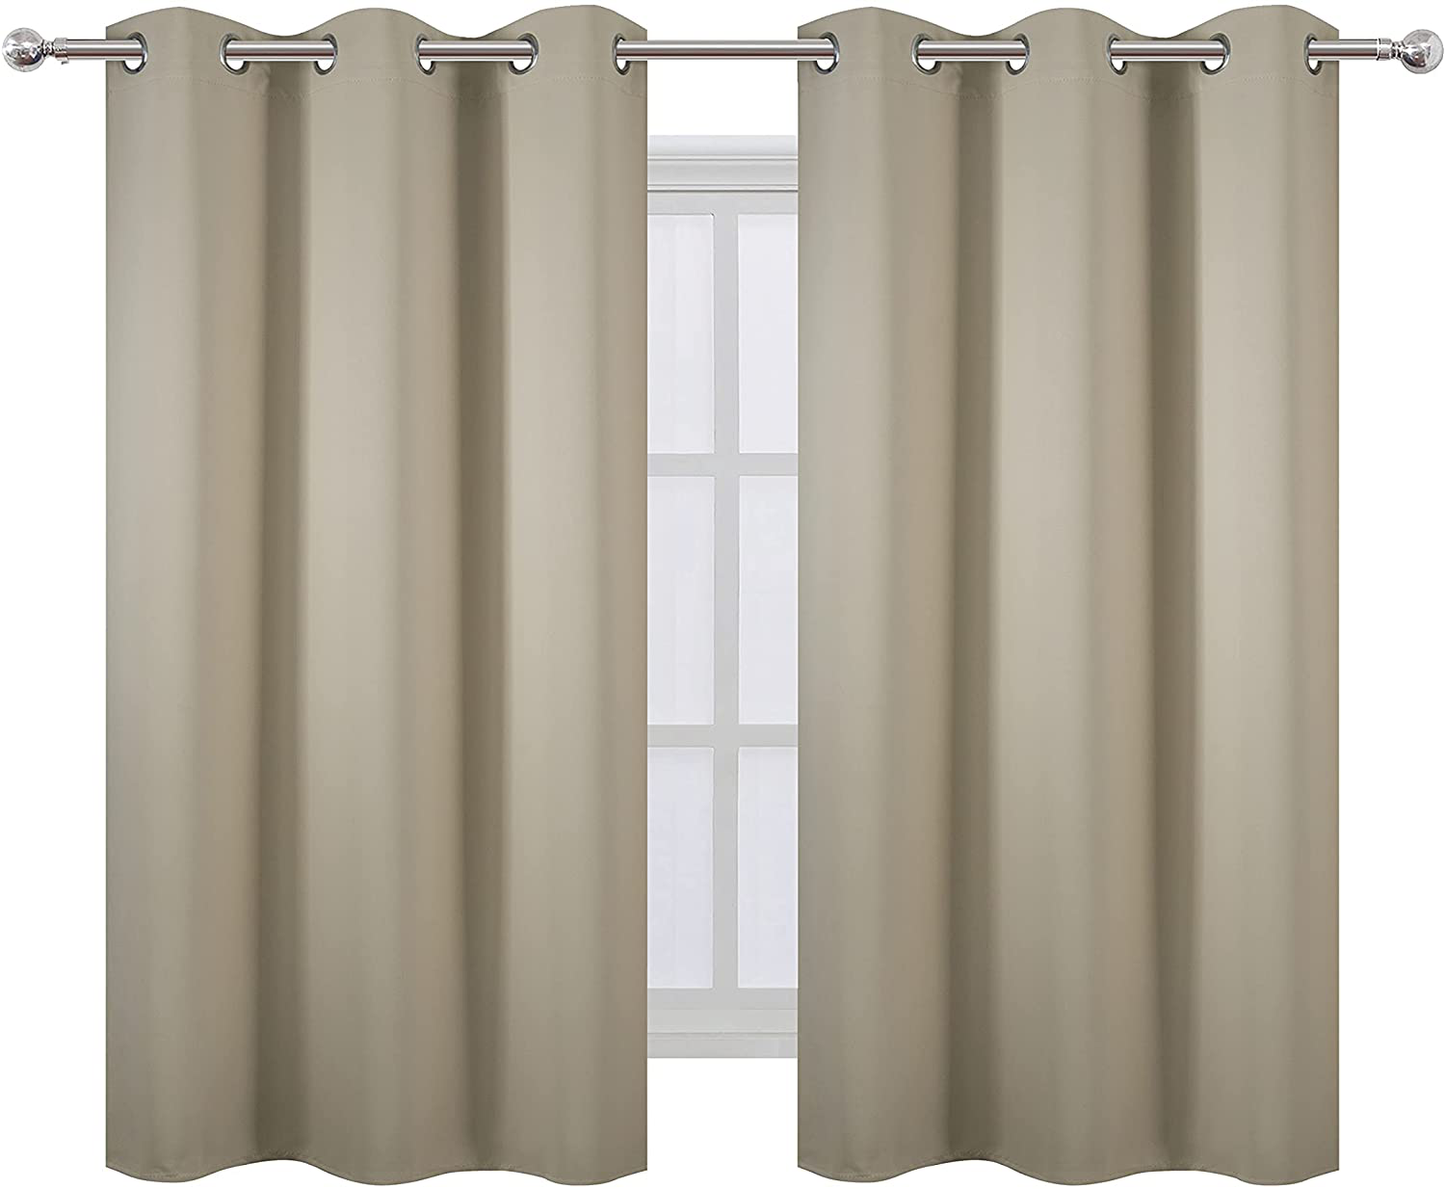 LEMOMO Burgundy Red Thermal Blackout Curtains/52 x 108 Inch/Set of 2 Panels Room Darkening Curtains for Bedroom